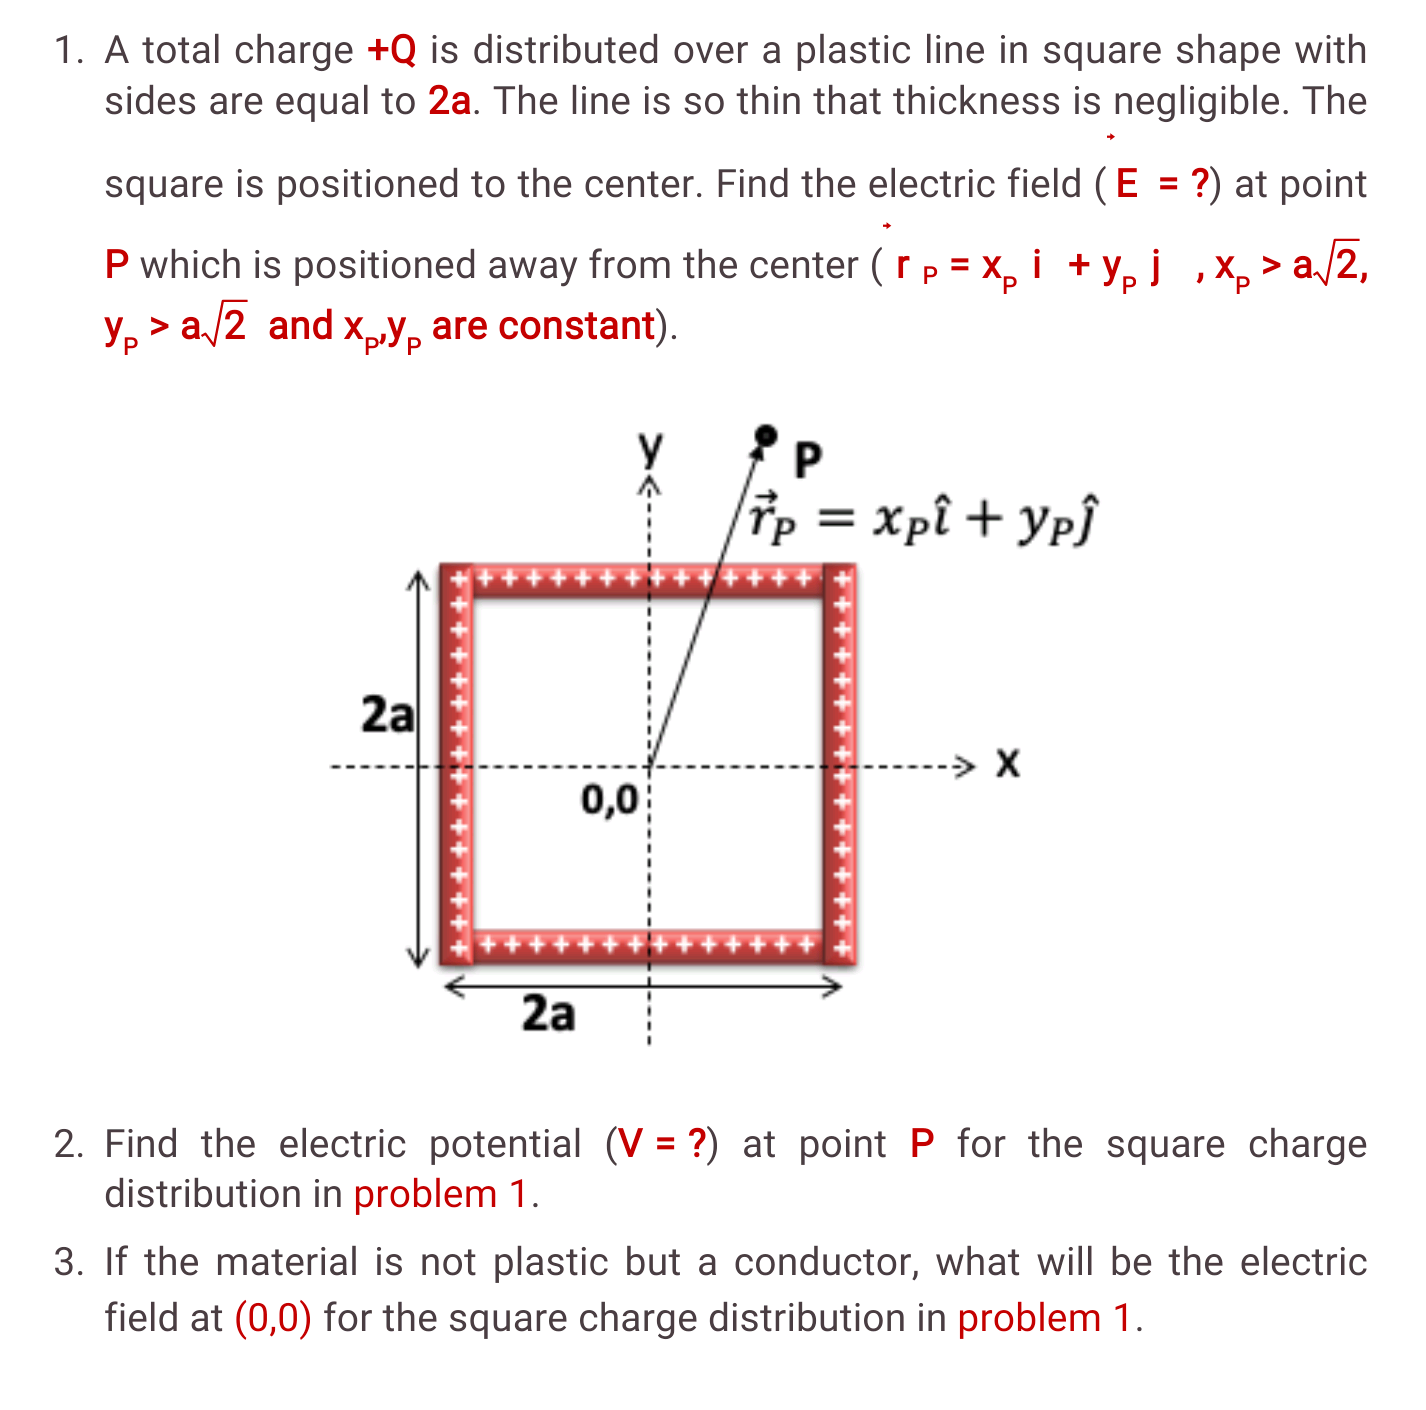 3. If the material is not plastic but a conductor, what will be the electric
field at (0,0) for the square charge distribution in problem 1.
